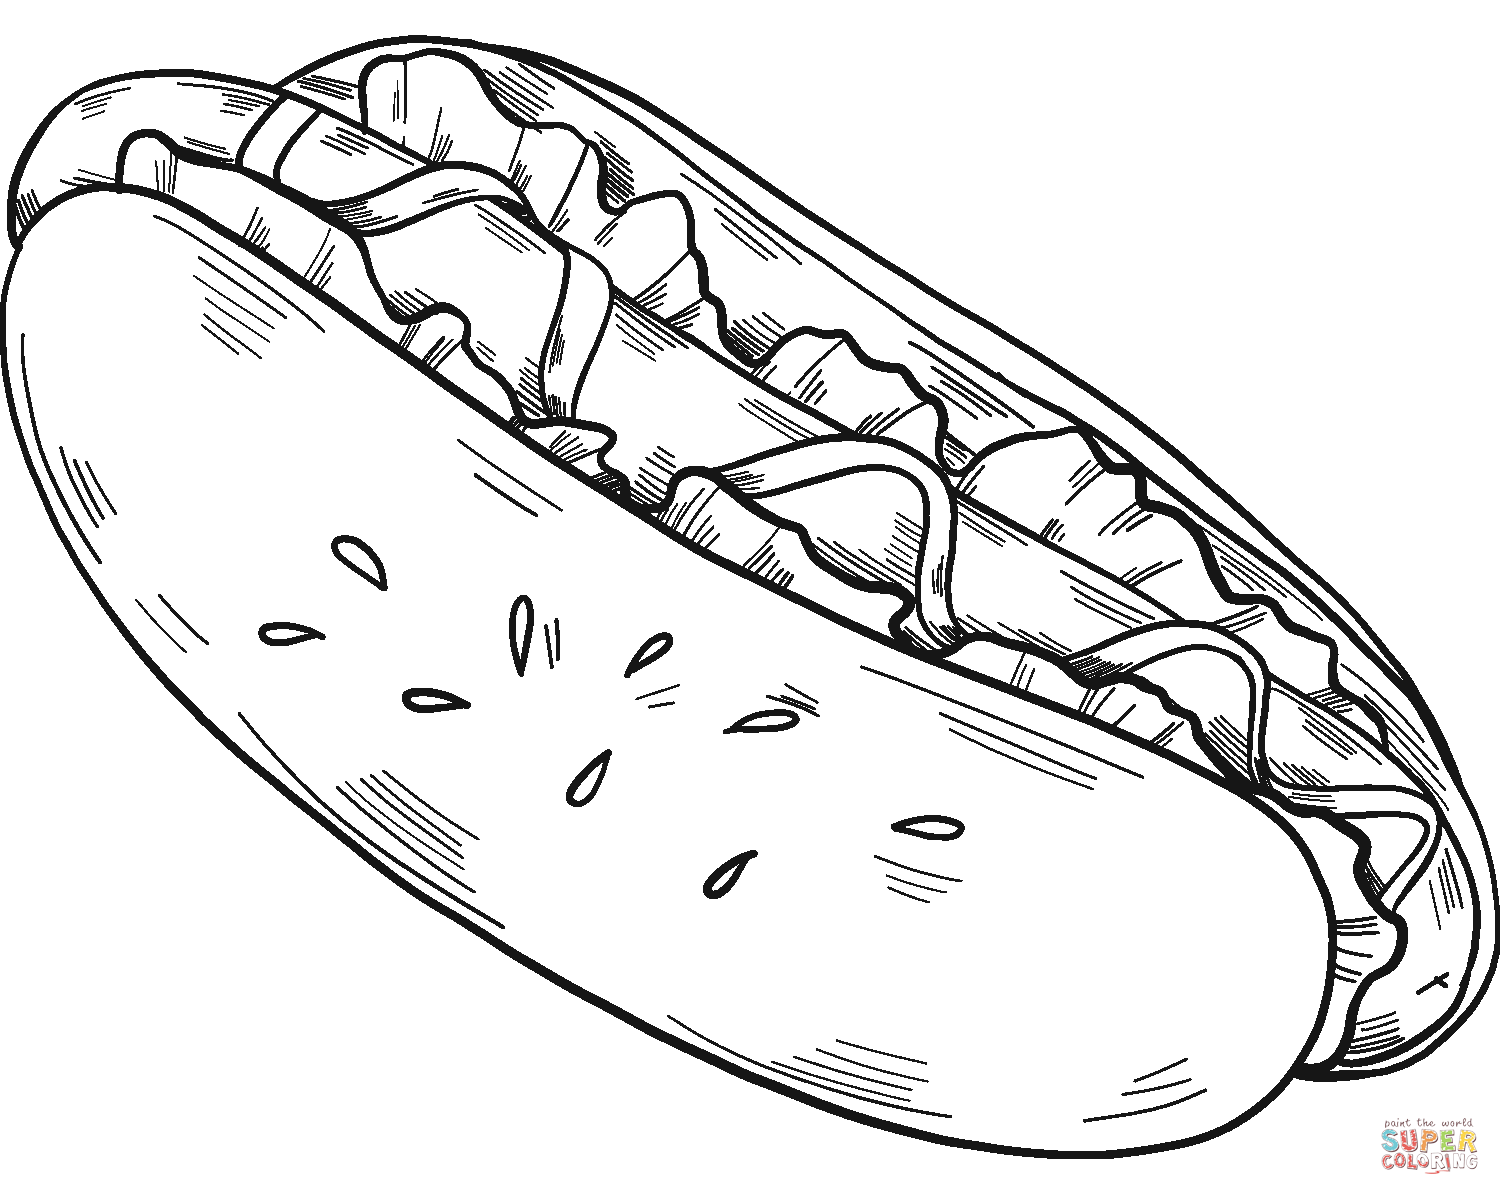 Hot Dog coloring page | Free Printable Coloring Pages